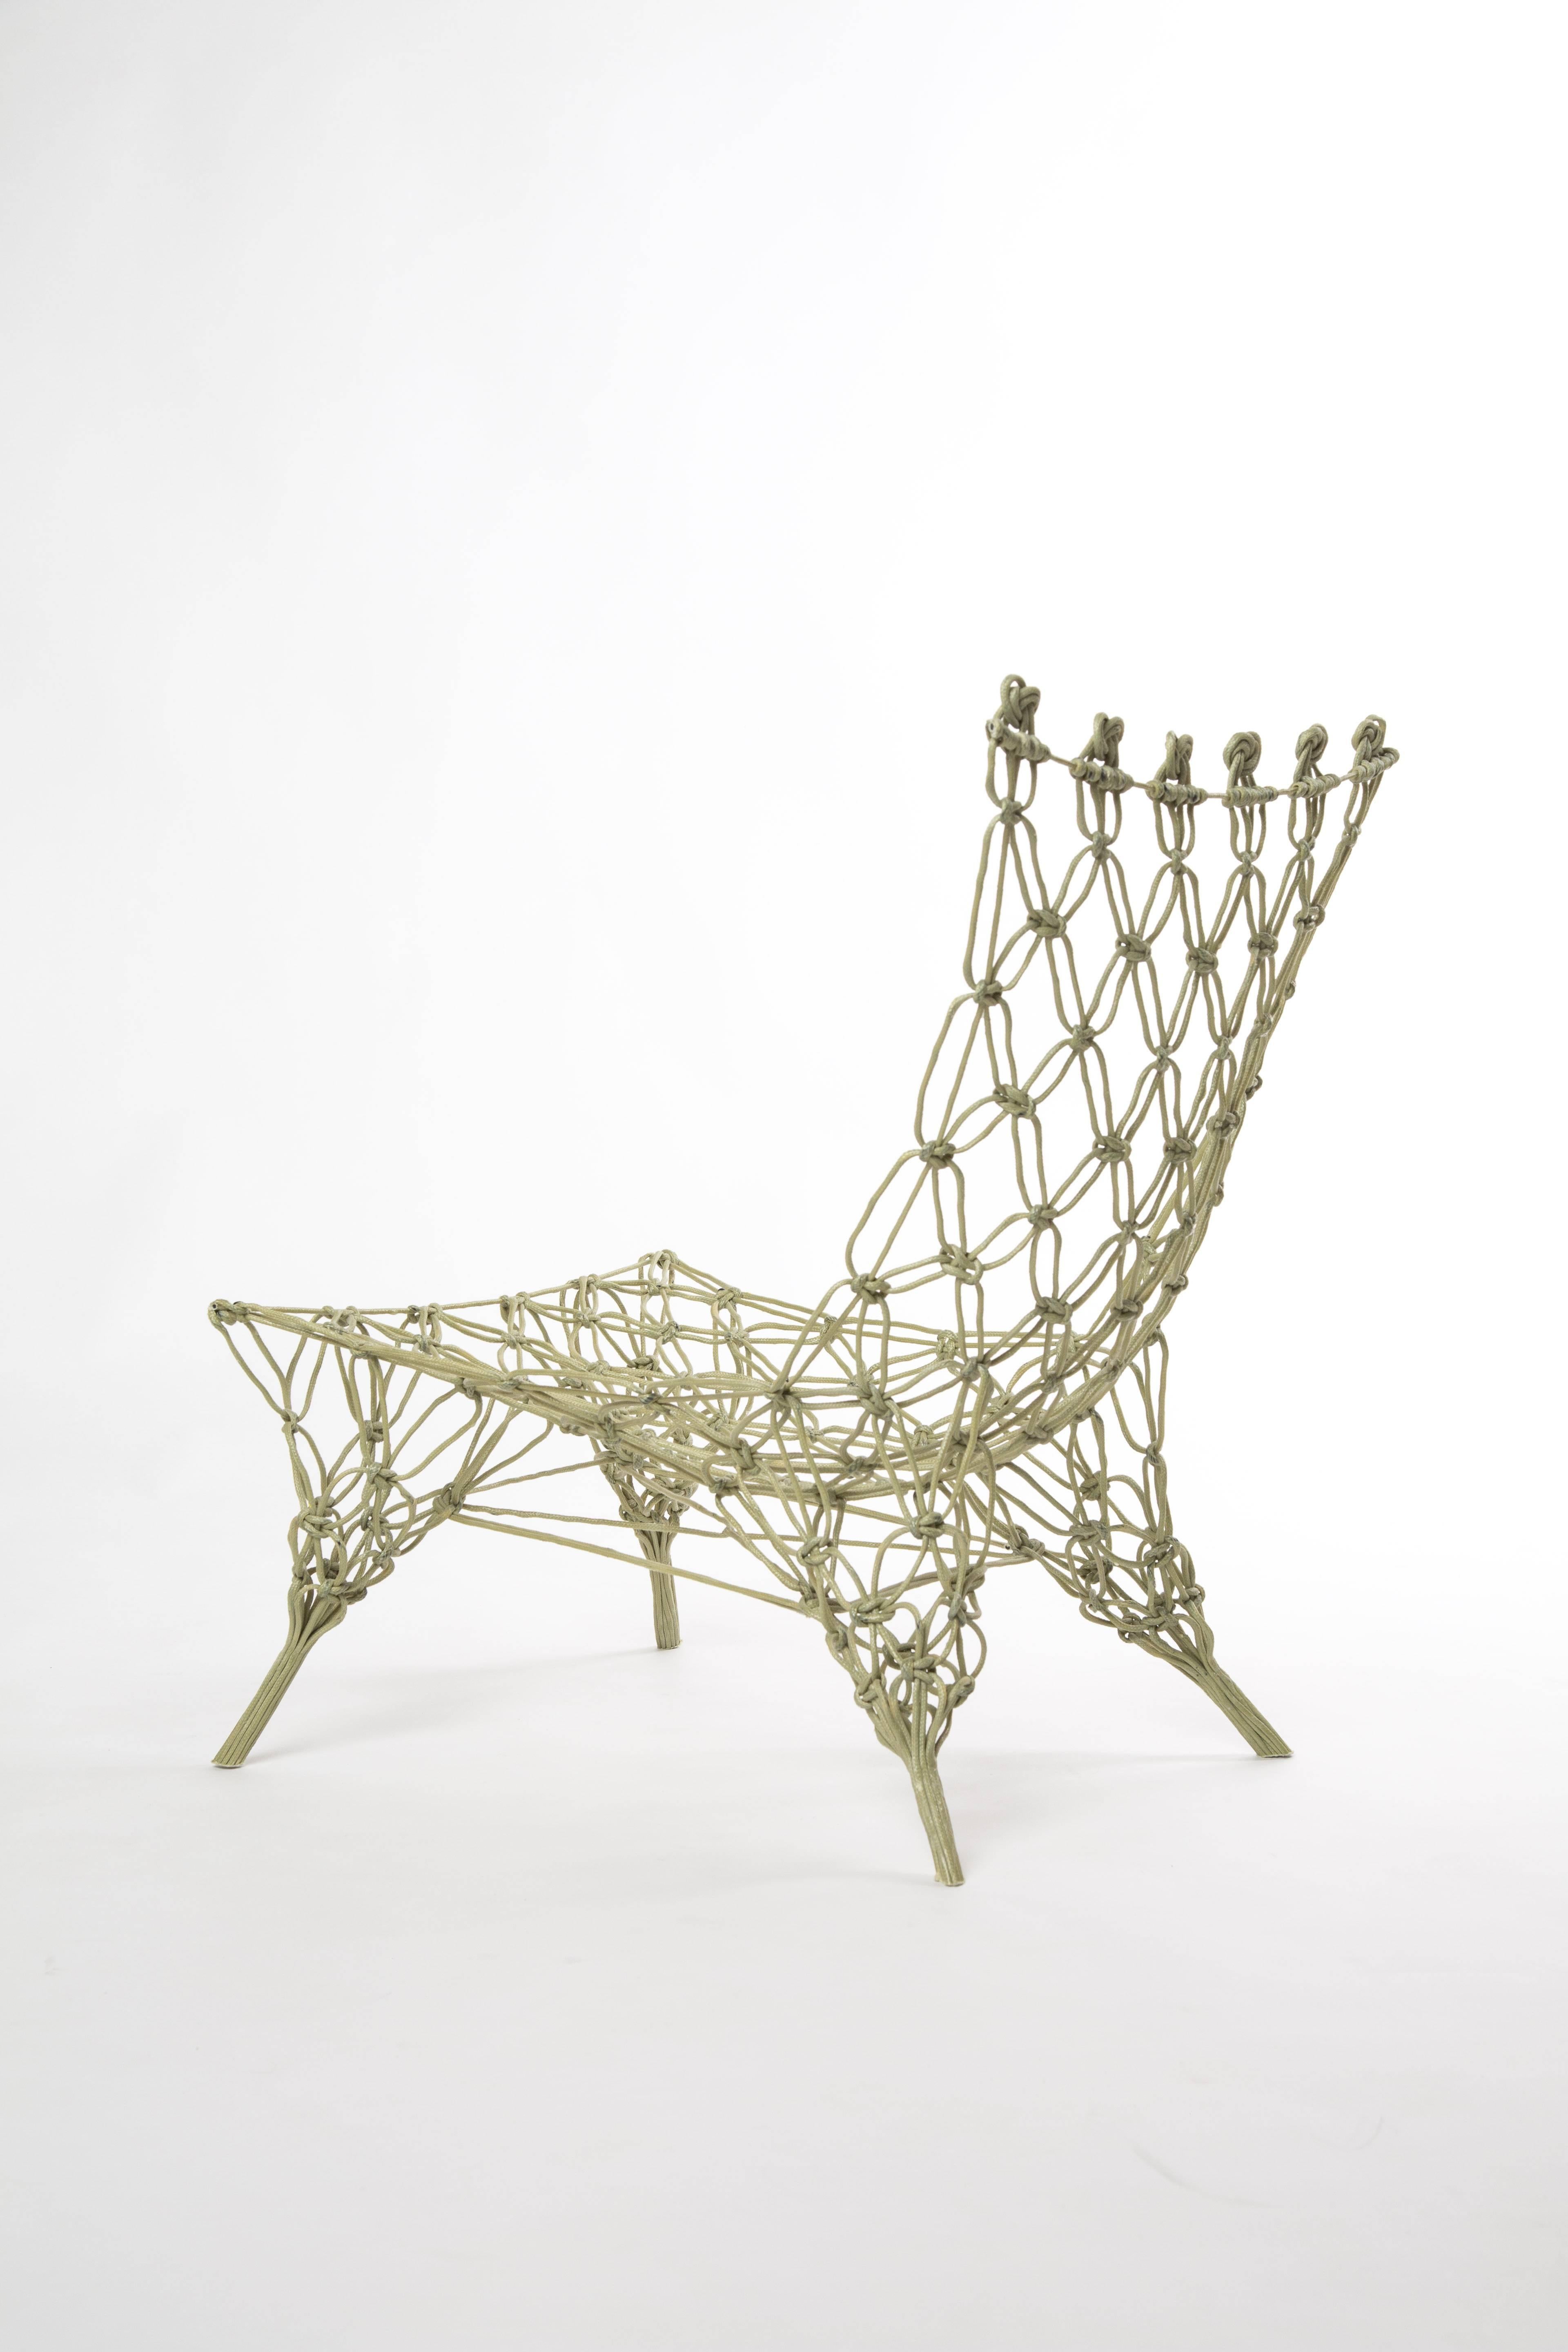 Dutch Knotted Chair Marcel Wanders for Droog Design, the Netherlands